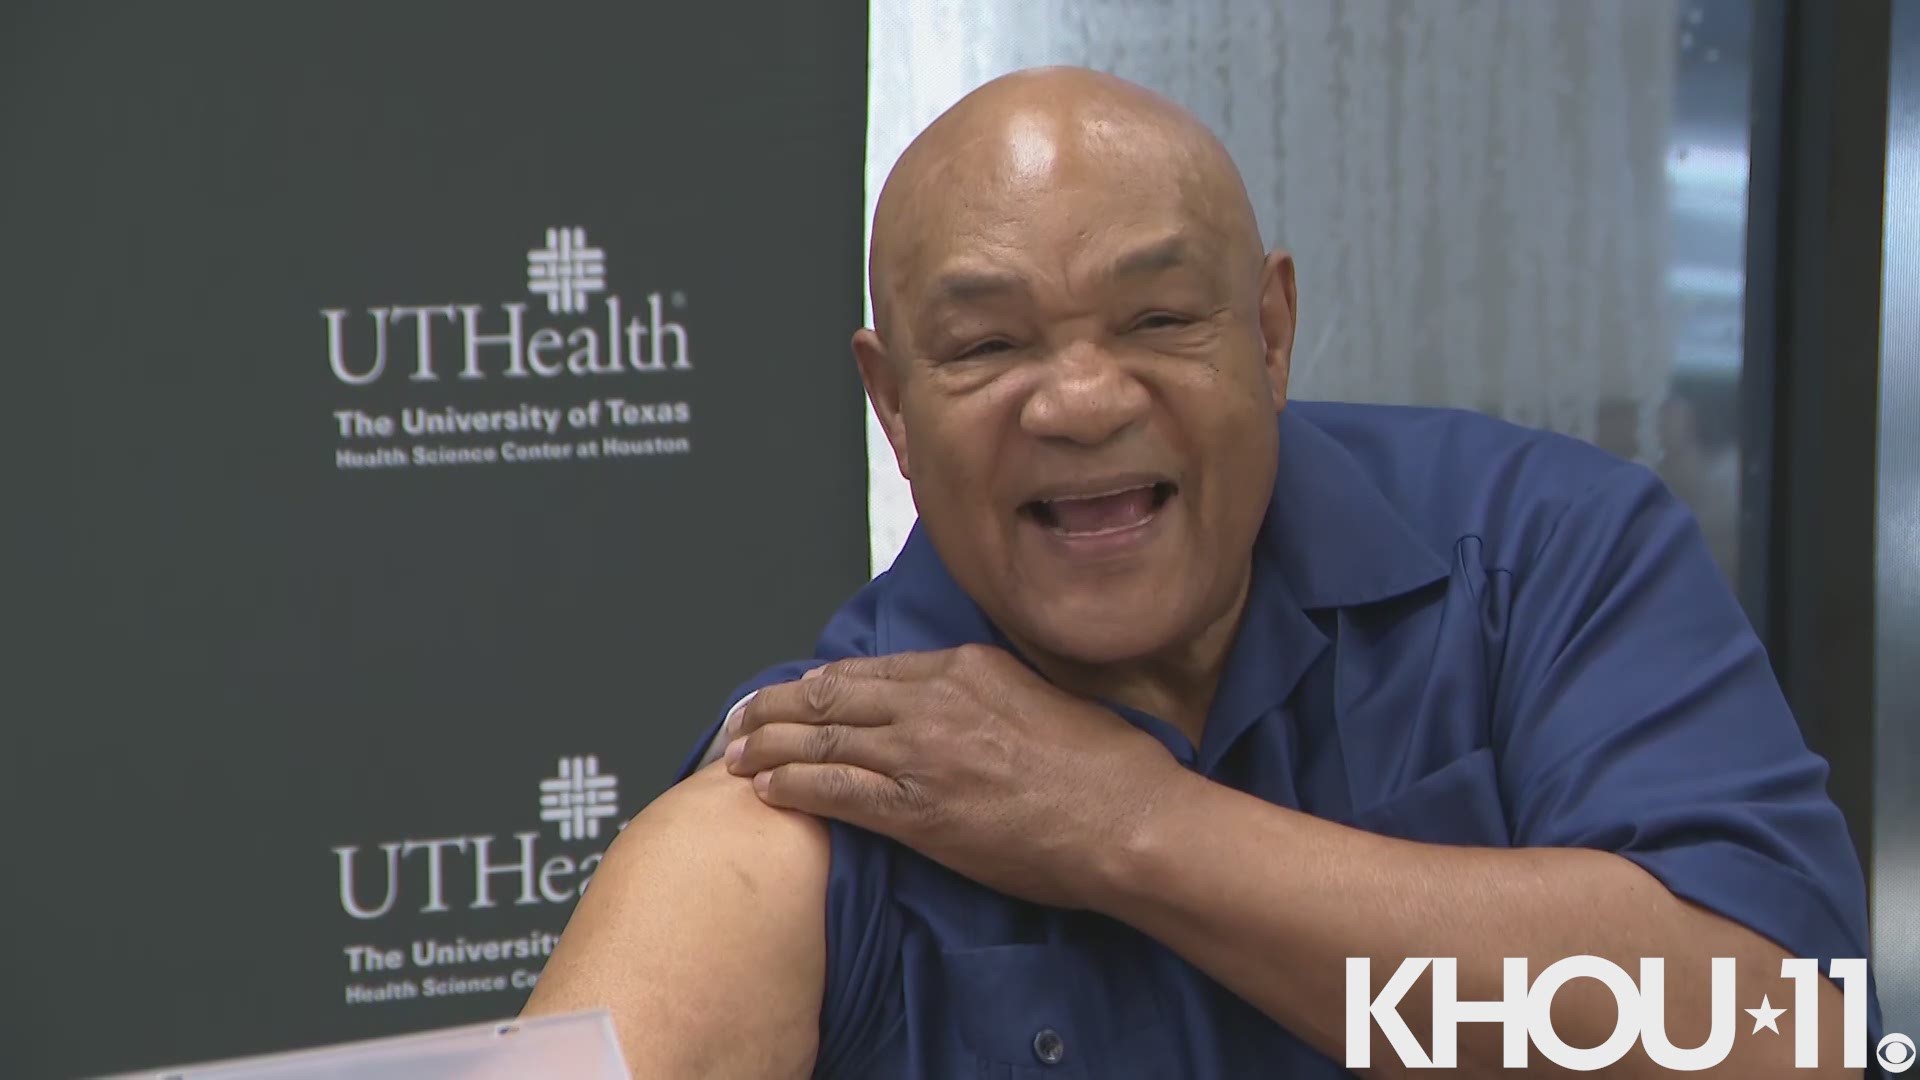 George Foreman joined UTHealth to spread awareness on the safety of the COVID-19 vaccine.